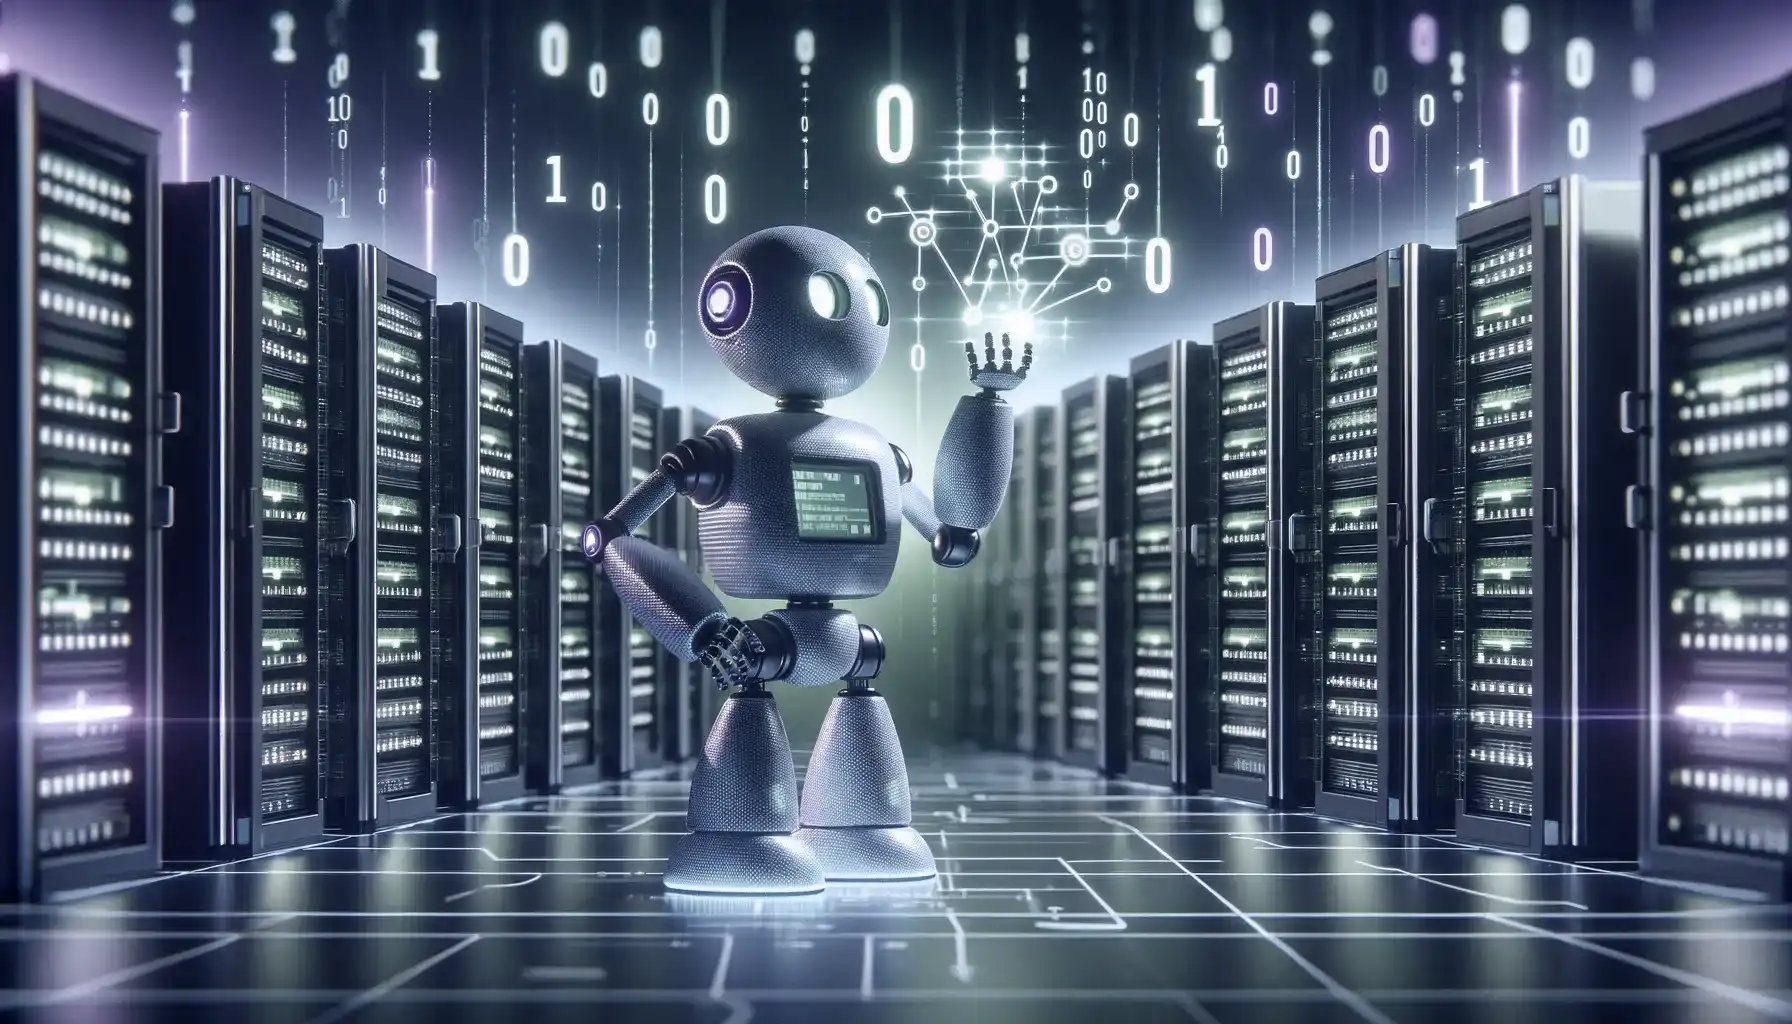 This image visually represents the concept of robotic business process automation, particularly focusing on low-code RPA (Robotic Process Automation) solutions. It features a scene with data racks and robotic figures, symbolizing the integration and implementation of robotic automation in business processes. In the background, binary codes (1s and 0s) are depicted, representing the digital and computational foundation of these solutions. The entire scene is bathed in bright neon green and purple lights, which highlight the advanced, efficient, and innovative nature of the low-code RPA tools. These vibrant lights create a high-tech and futuristic atmosphere, emphasizing the transformative impact of low-code RPA in enhancing scalability and improving the performance of bots on virtual hosts, thus optimizing business operations.